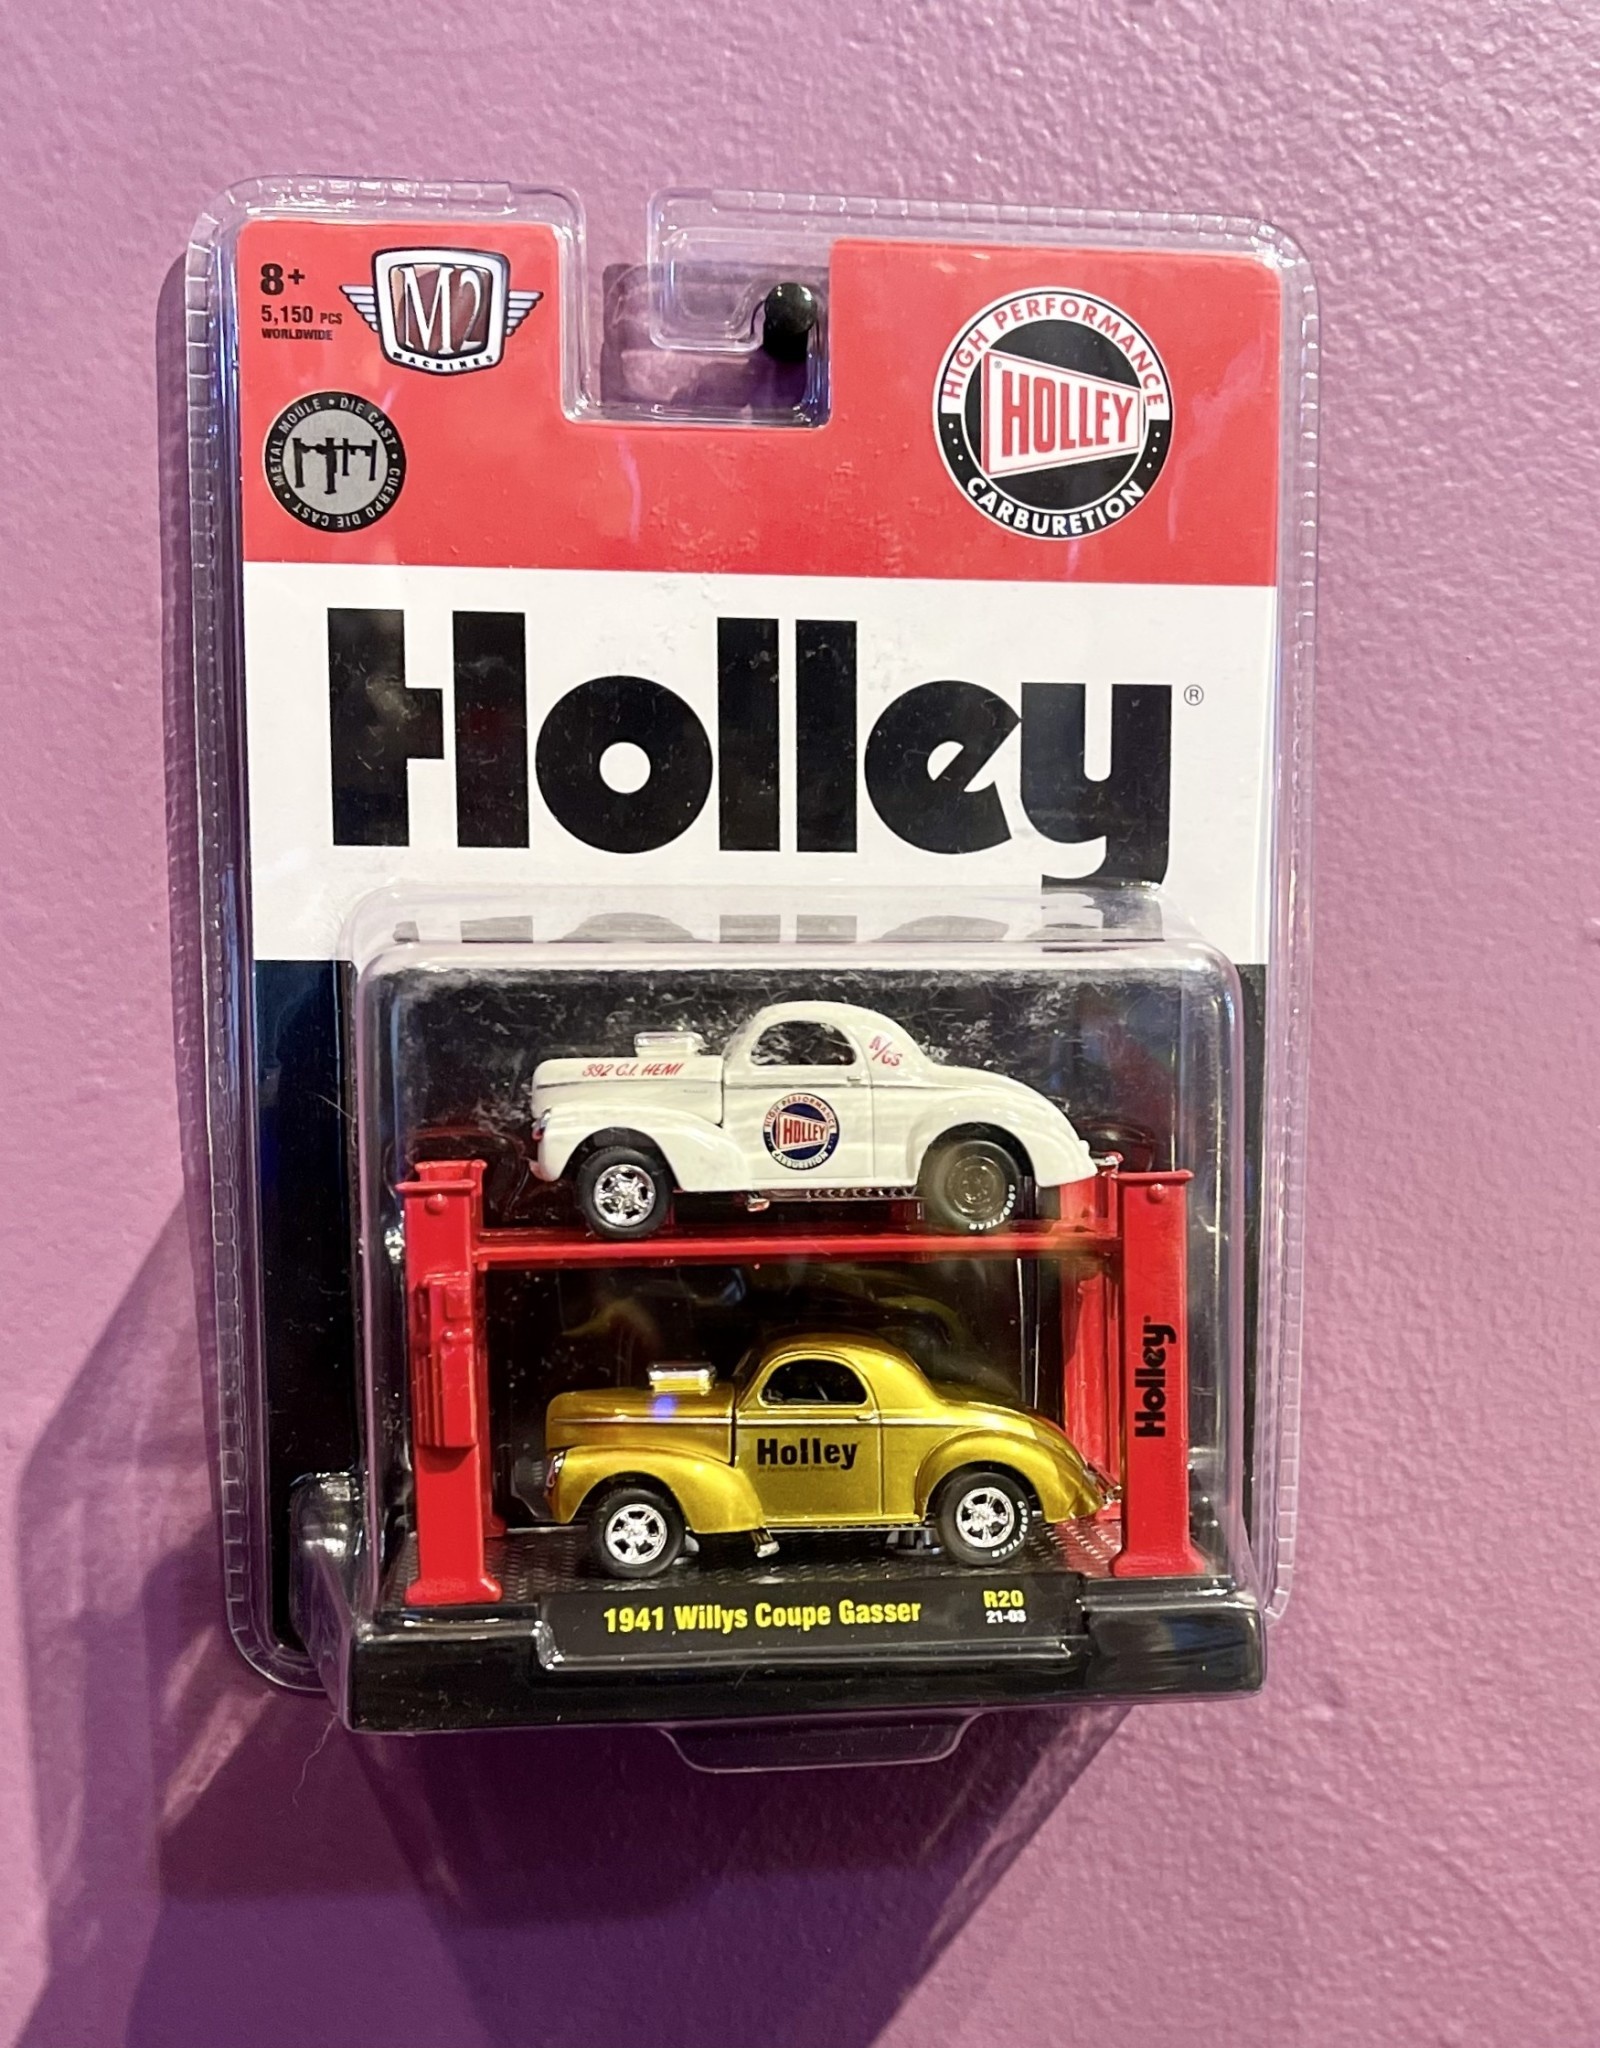 DieCast Car M2 Machines Auto Lift Holley 1941 Willys Coupe Gasser R20 1:64 Scale